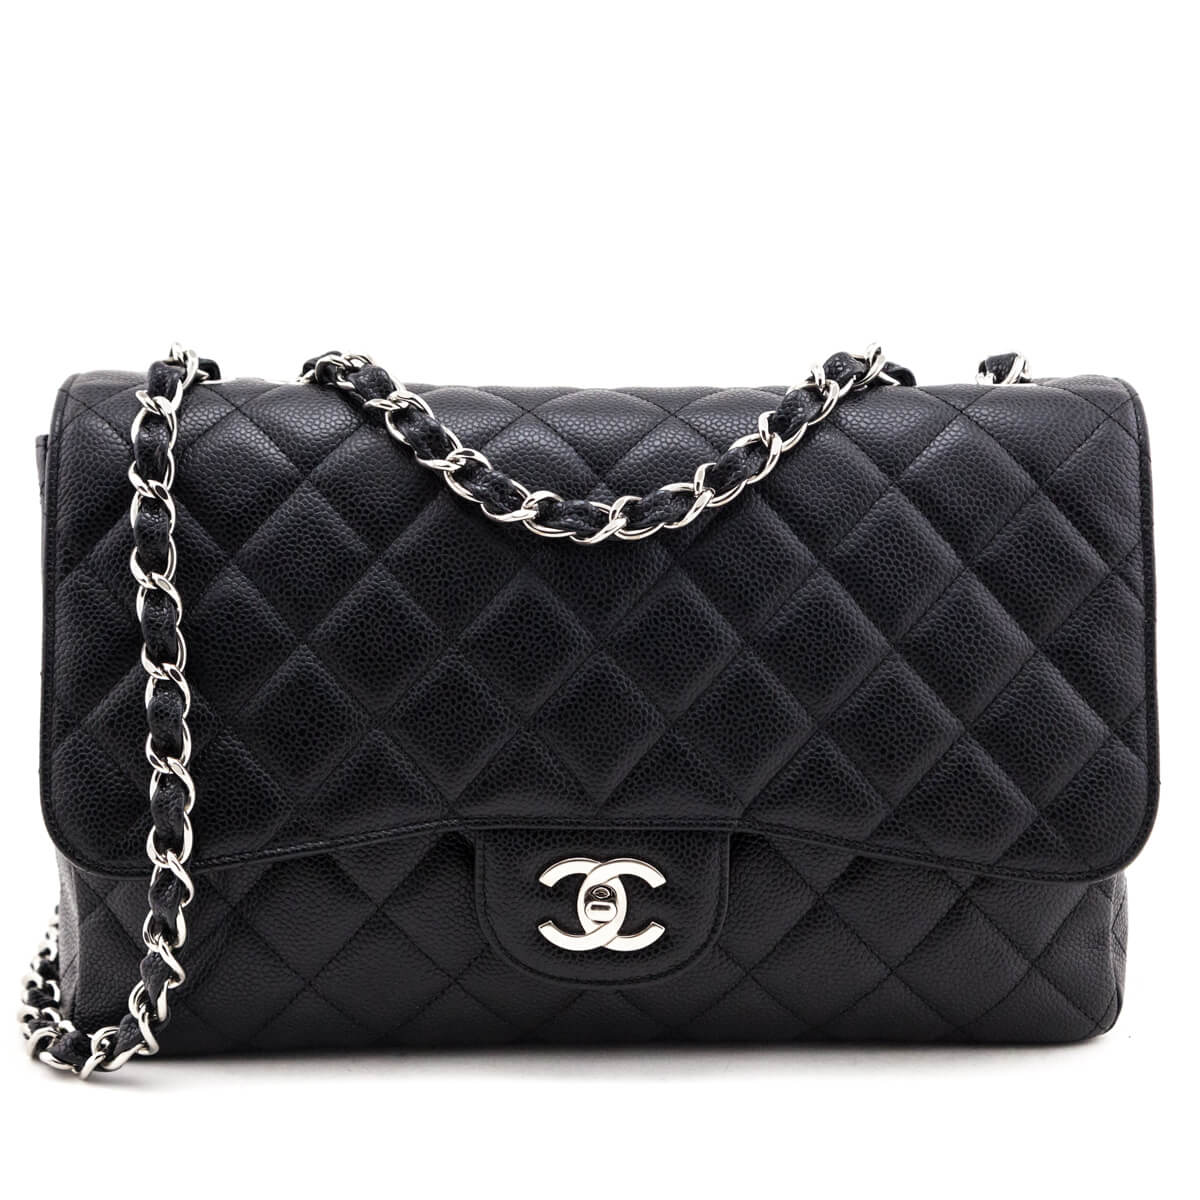 Chanel Black Quilted Caviar Jumbo Classic Single Flap Bag - Love that Bag etc - Preowned Authentic Designer Handbags & Preloved Fashions